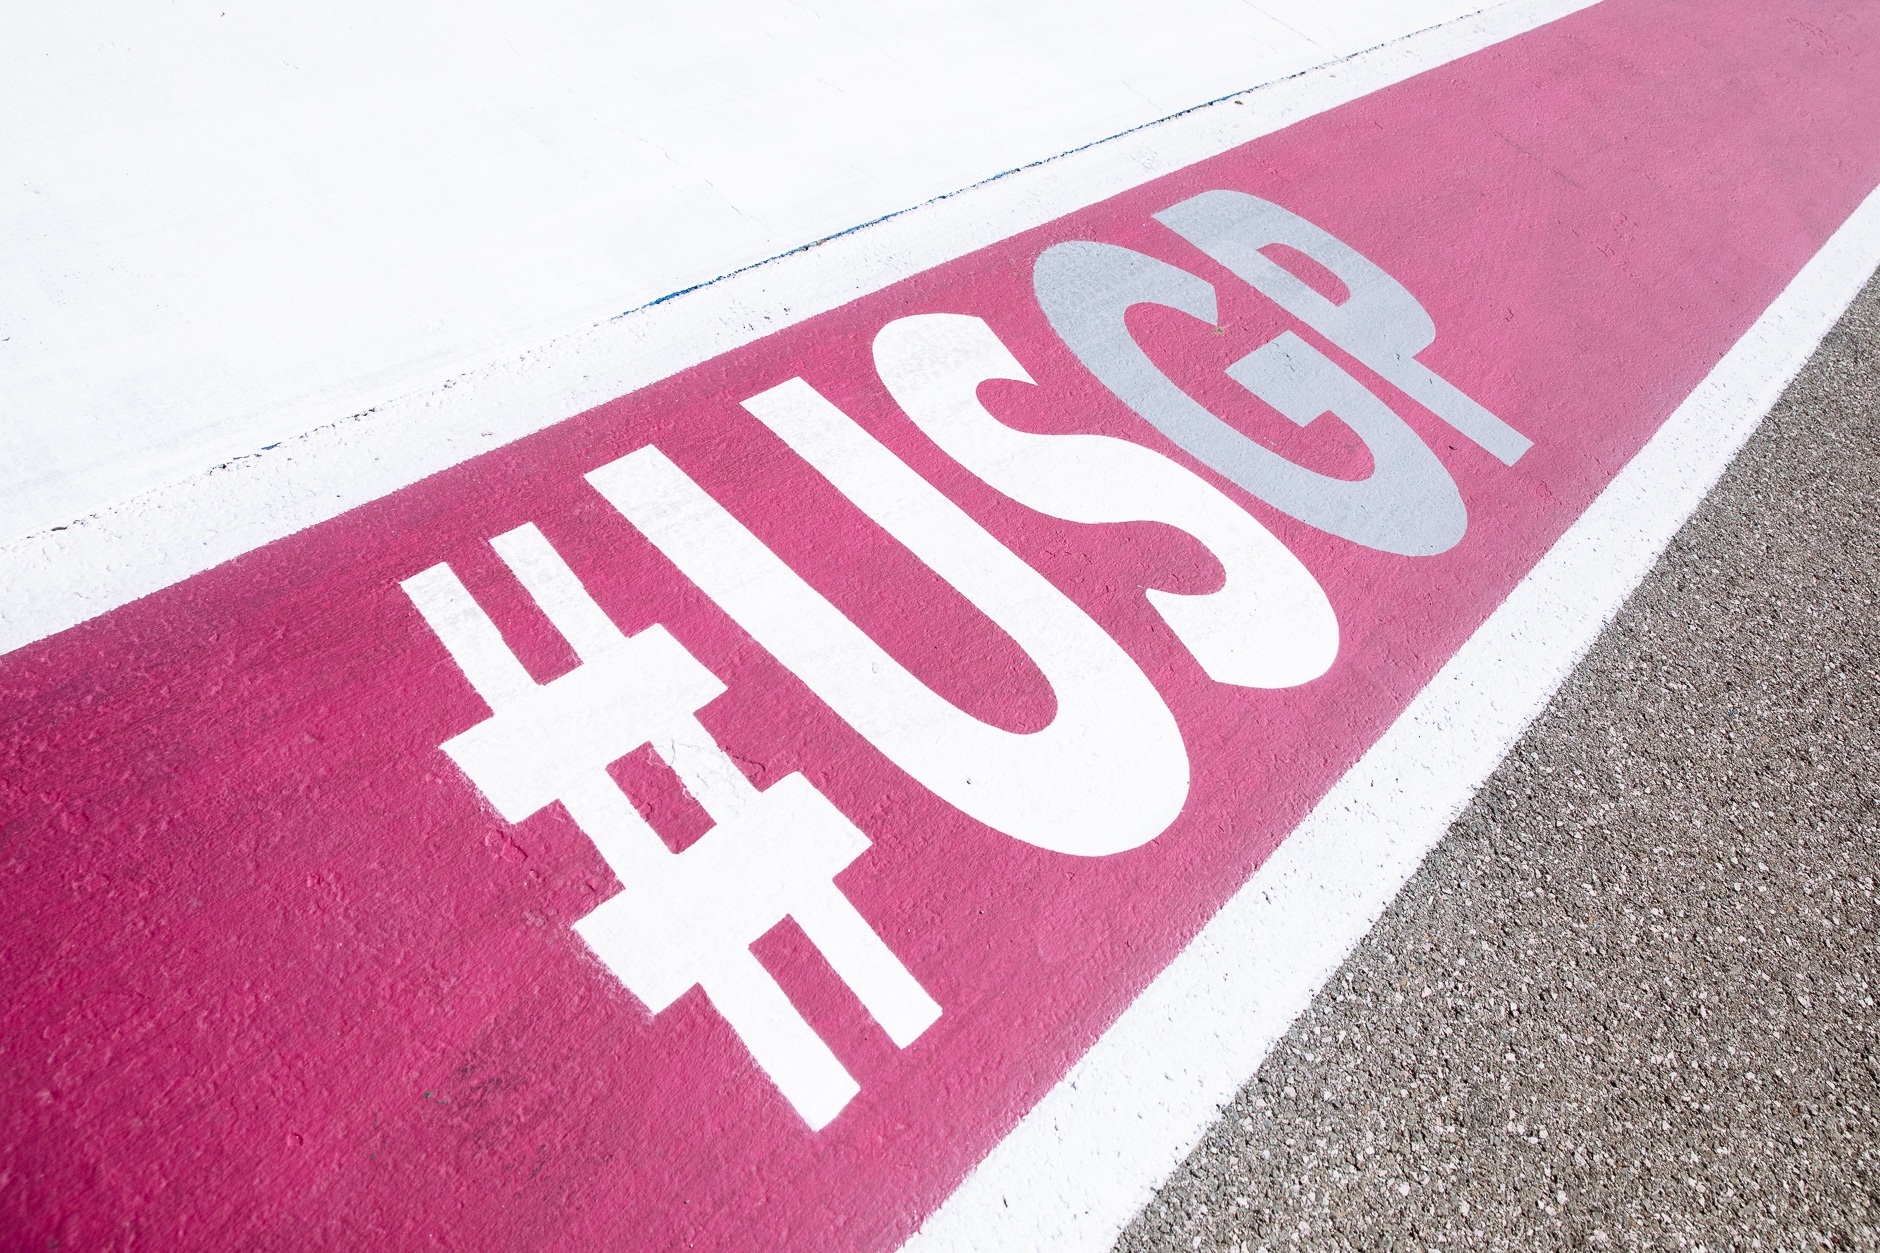 As part of the partnership with the Susan G. Komen Foundation, pit row was painted pink instead of the normal red color.